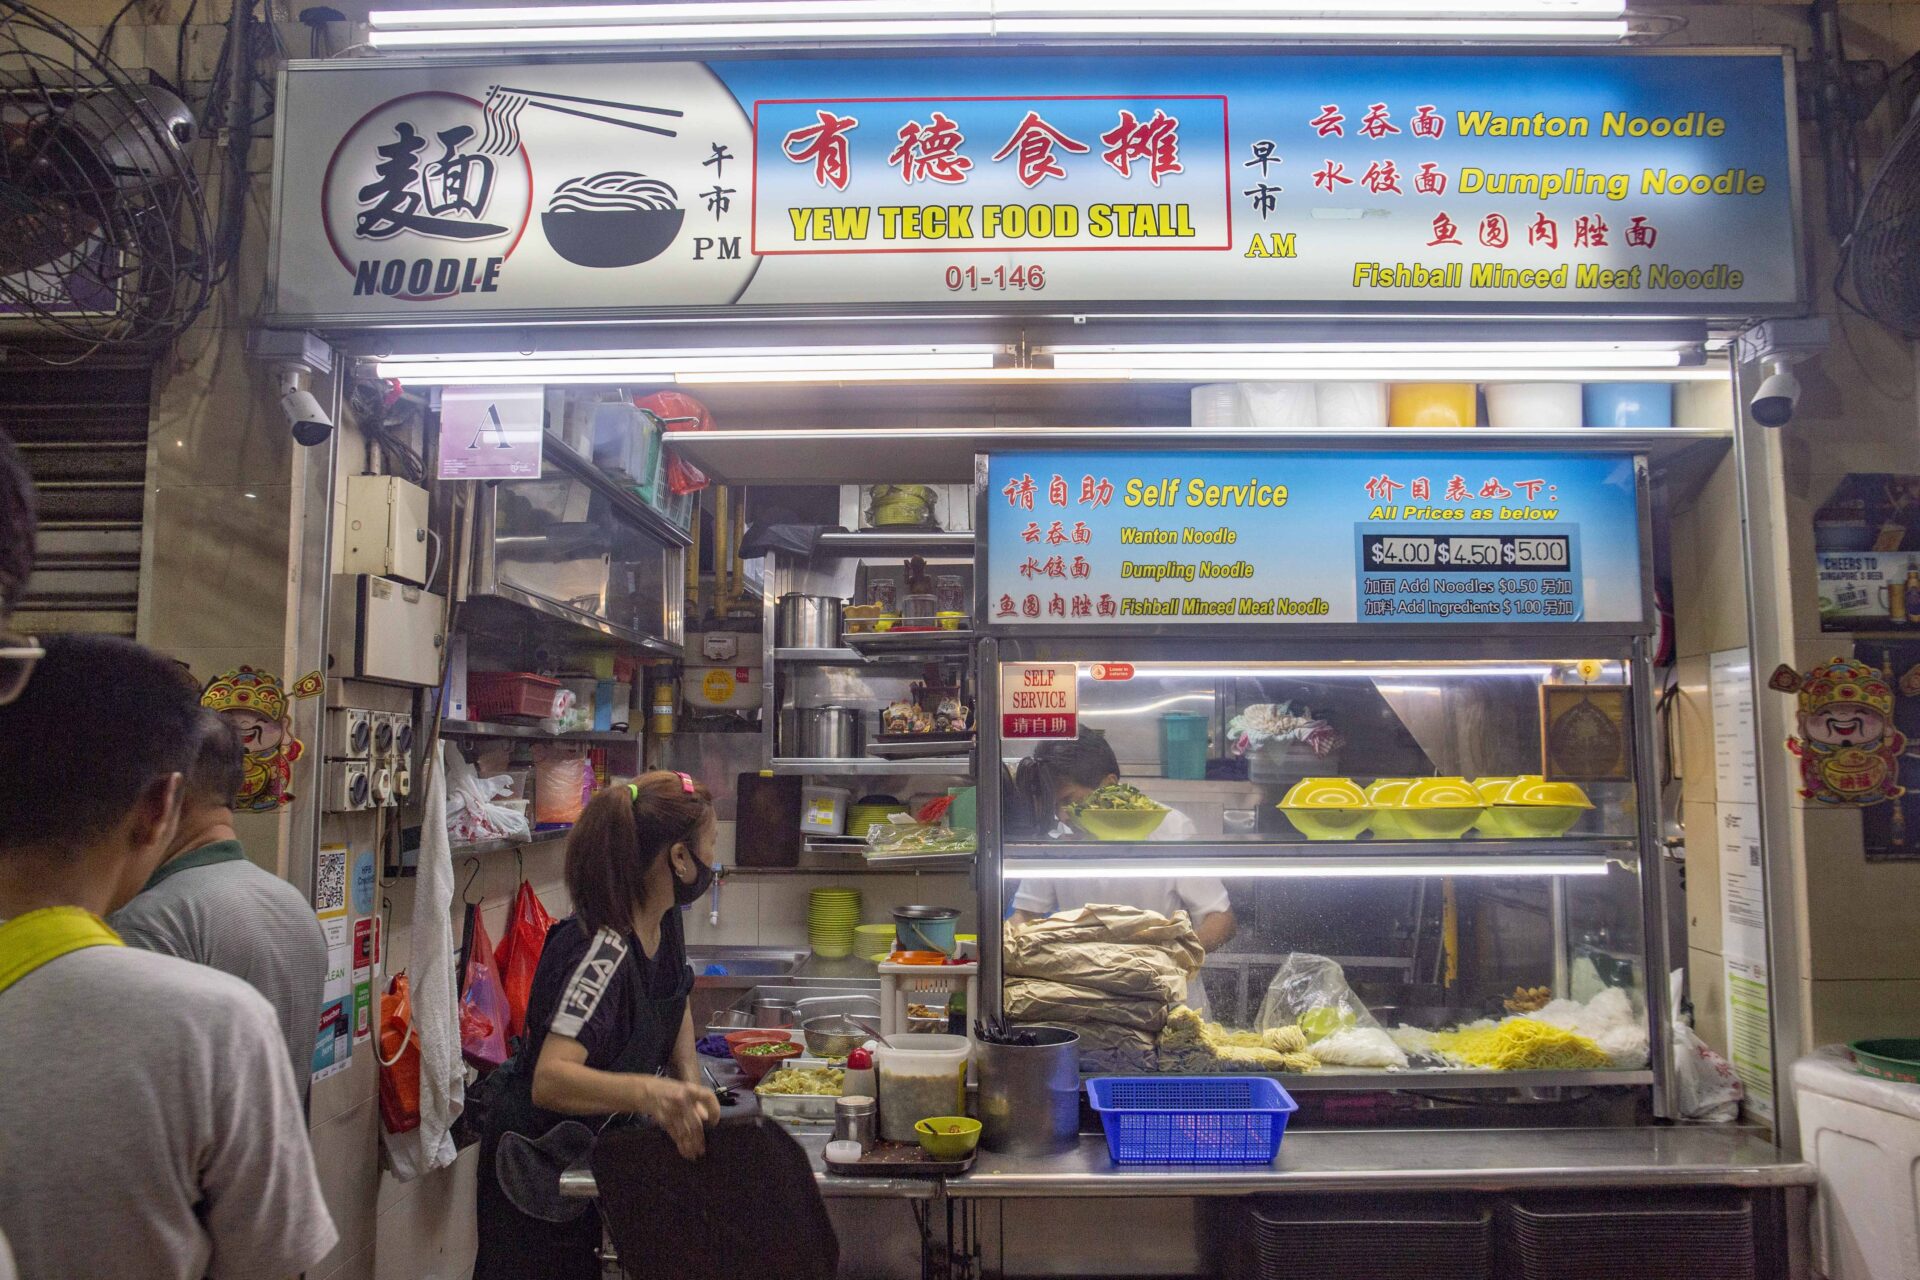 Yew Teck Food Stall - AM stallfront